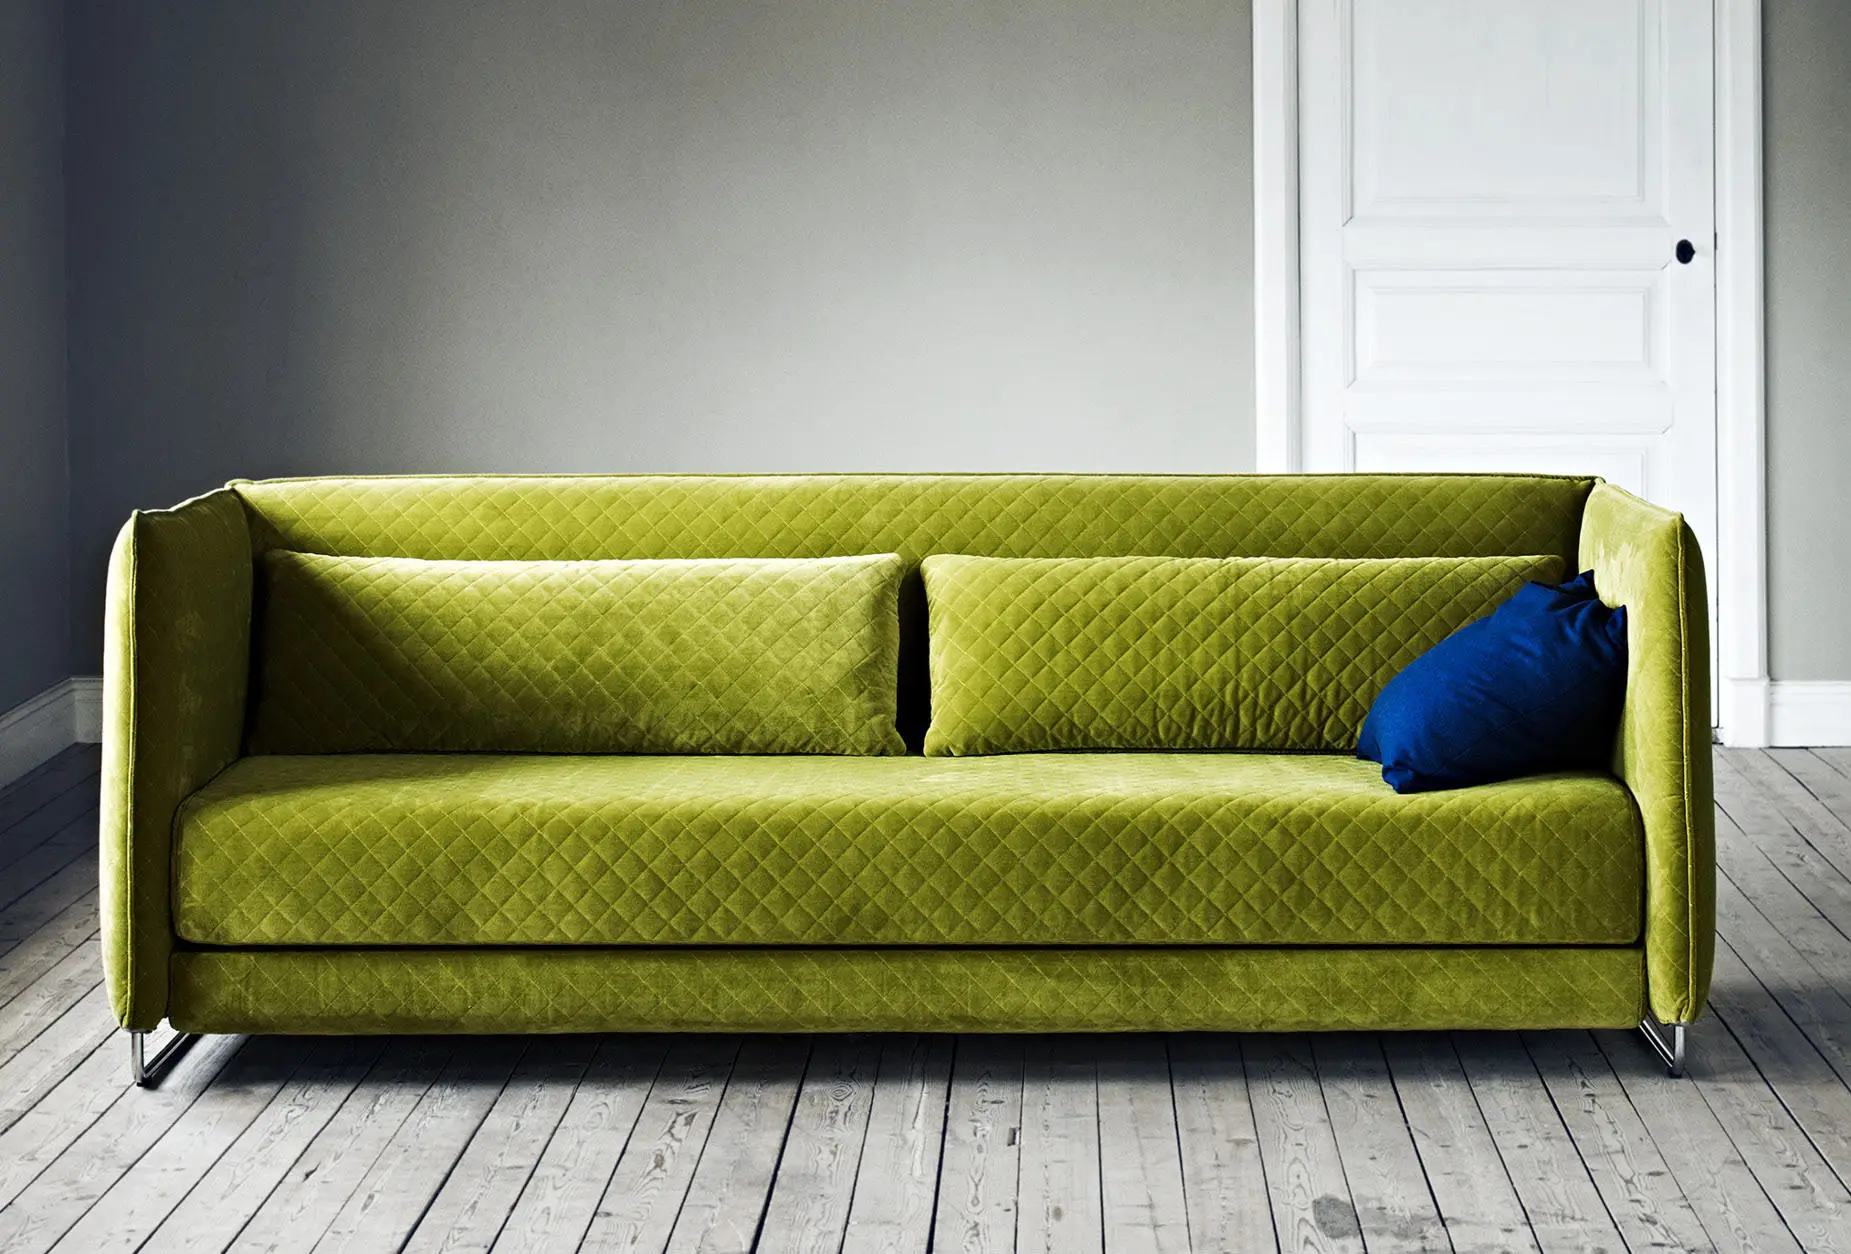 Sofa Bed Cord by Softline